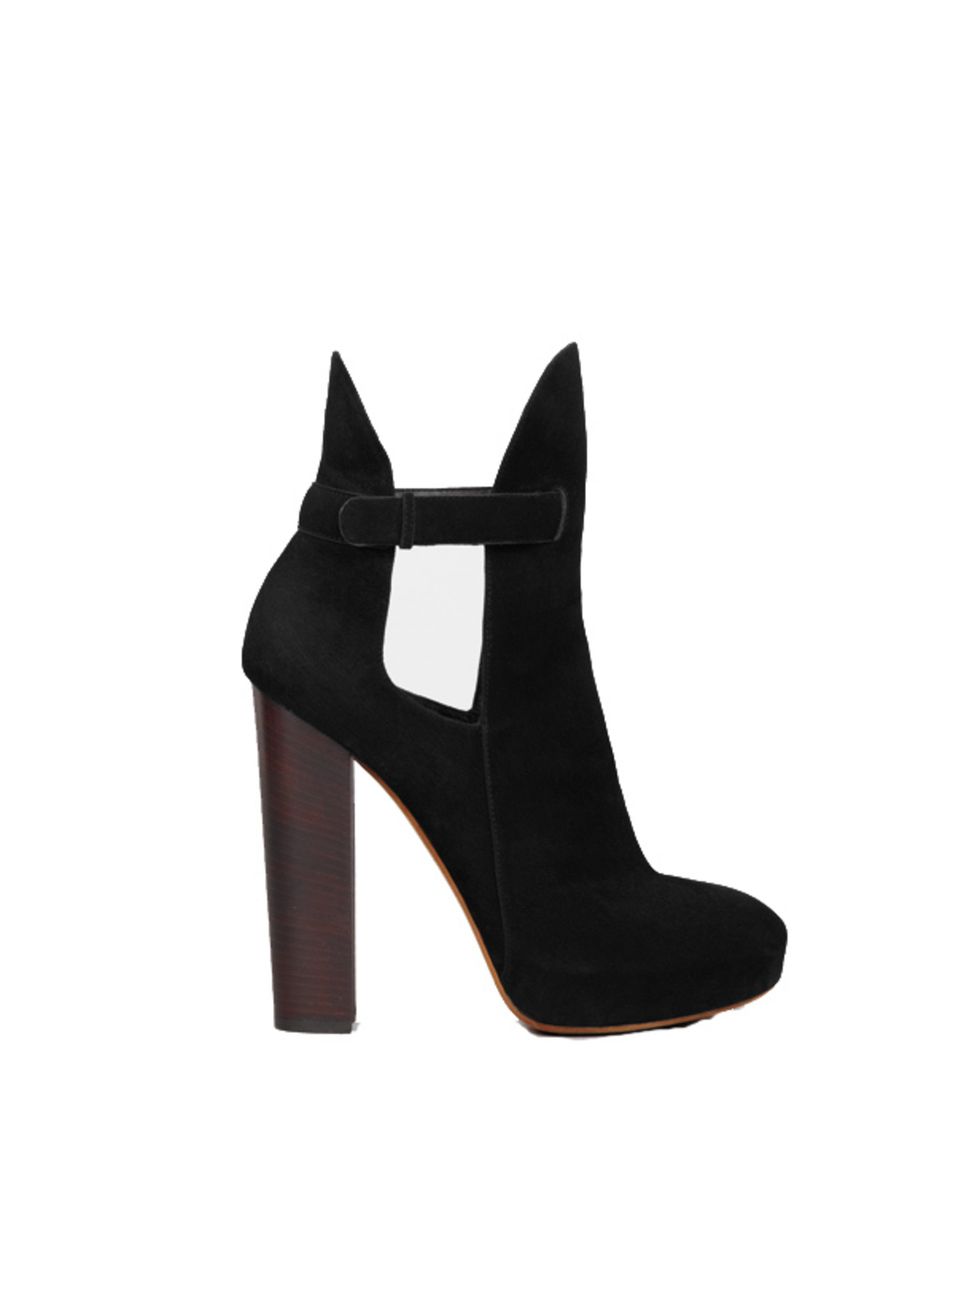 <p>Celine black suede cut-out ankle boot, £638 , for stockists call 0800 123 400</p>